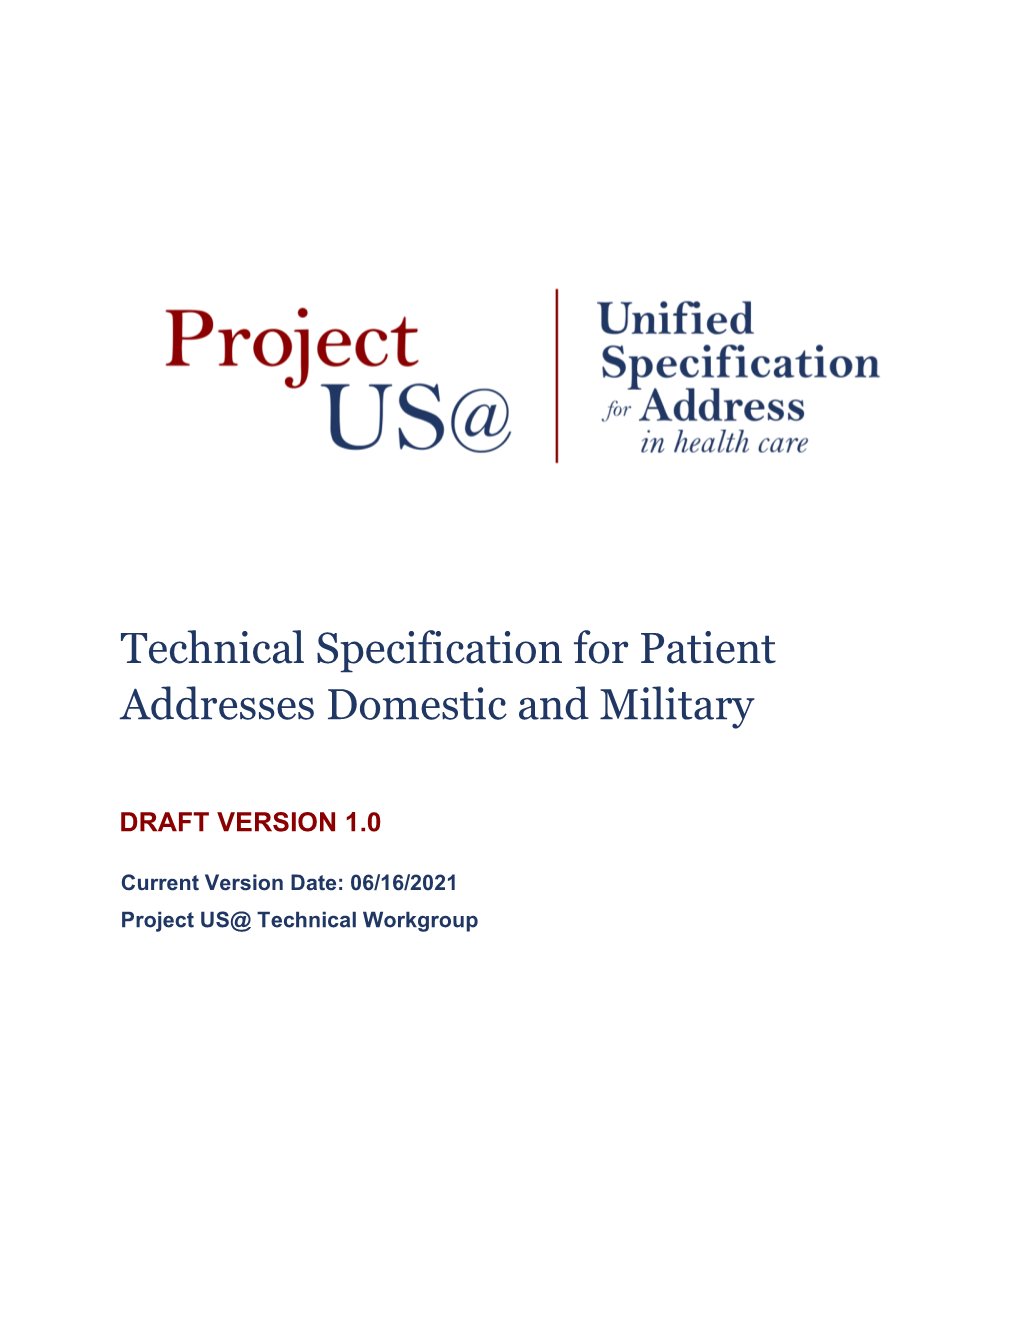 Technical Specification for Patient Addresses Domestic and Military